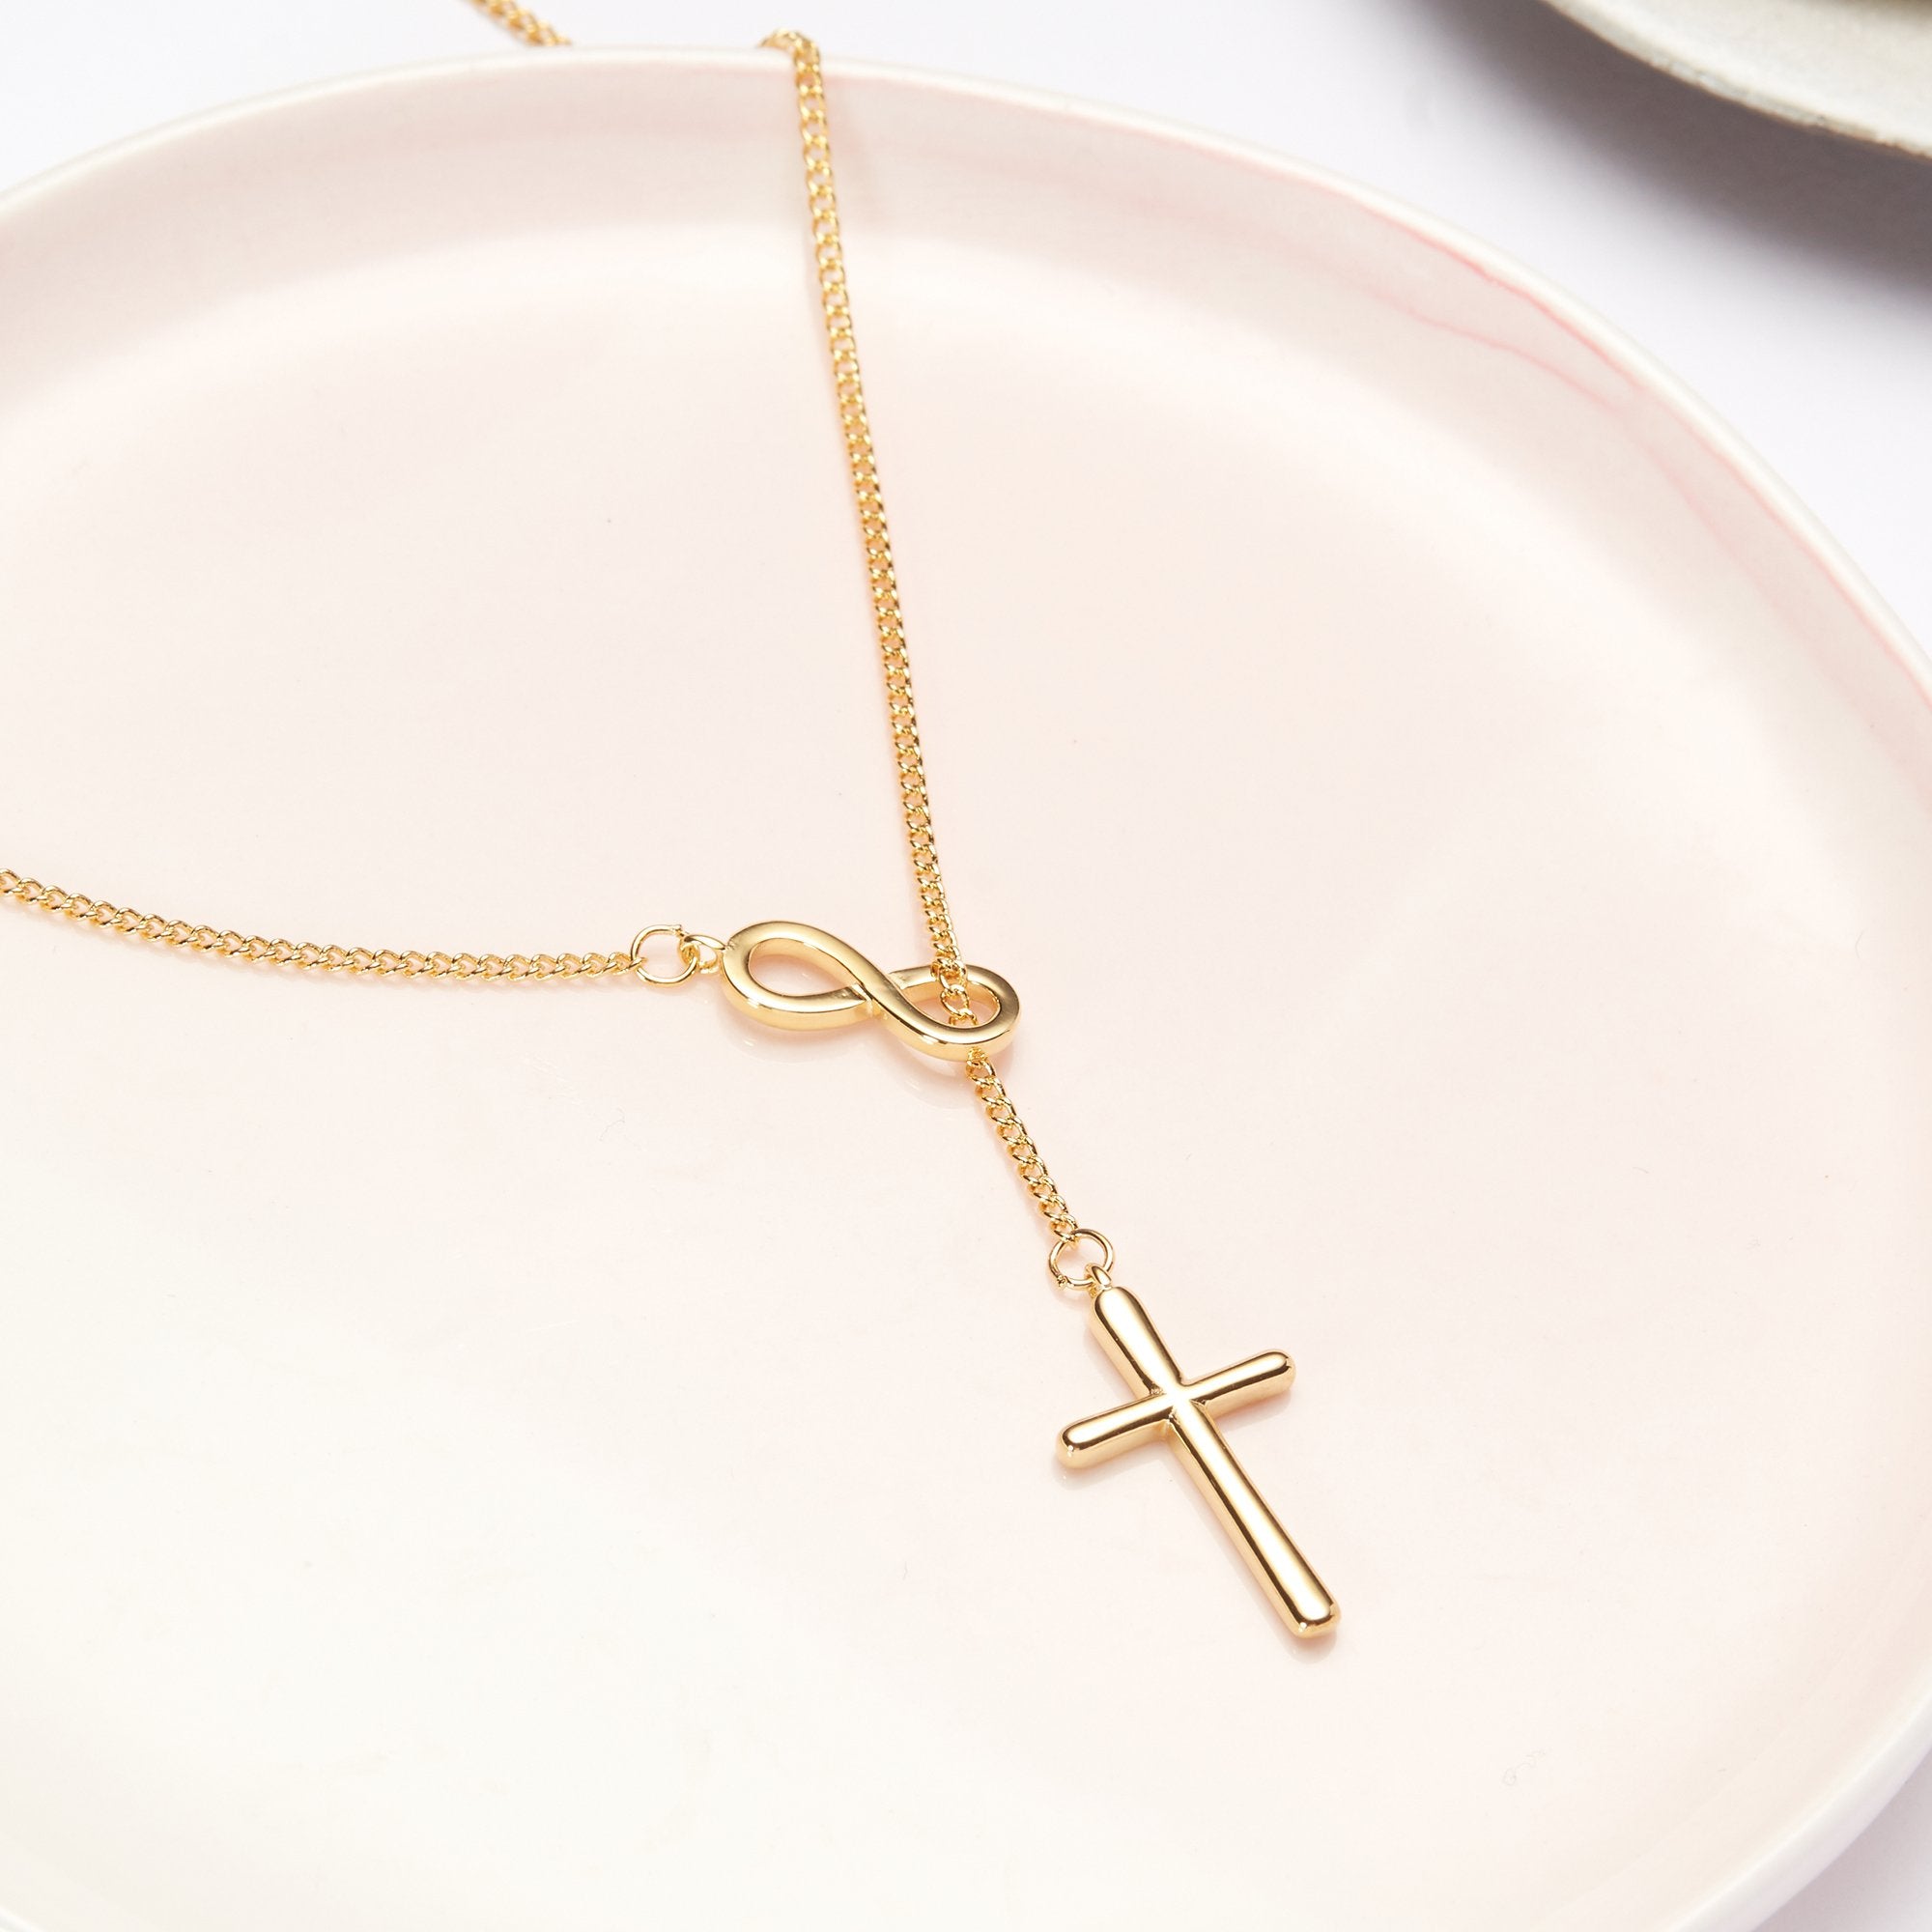 mother daughter cross necklace